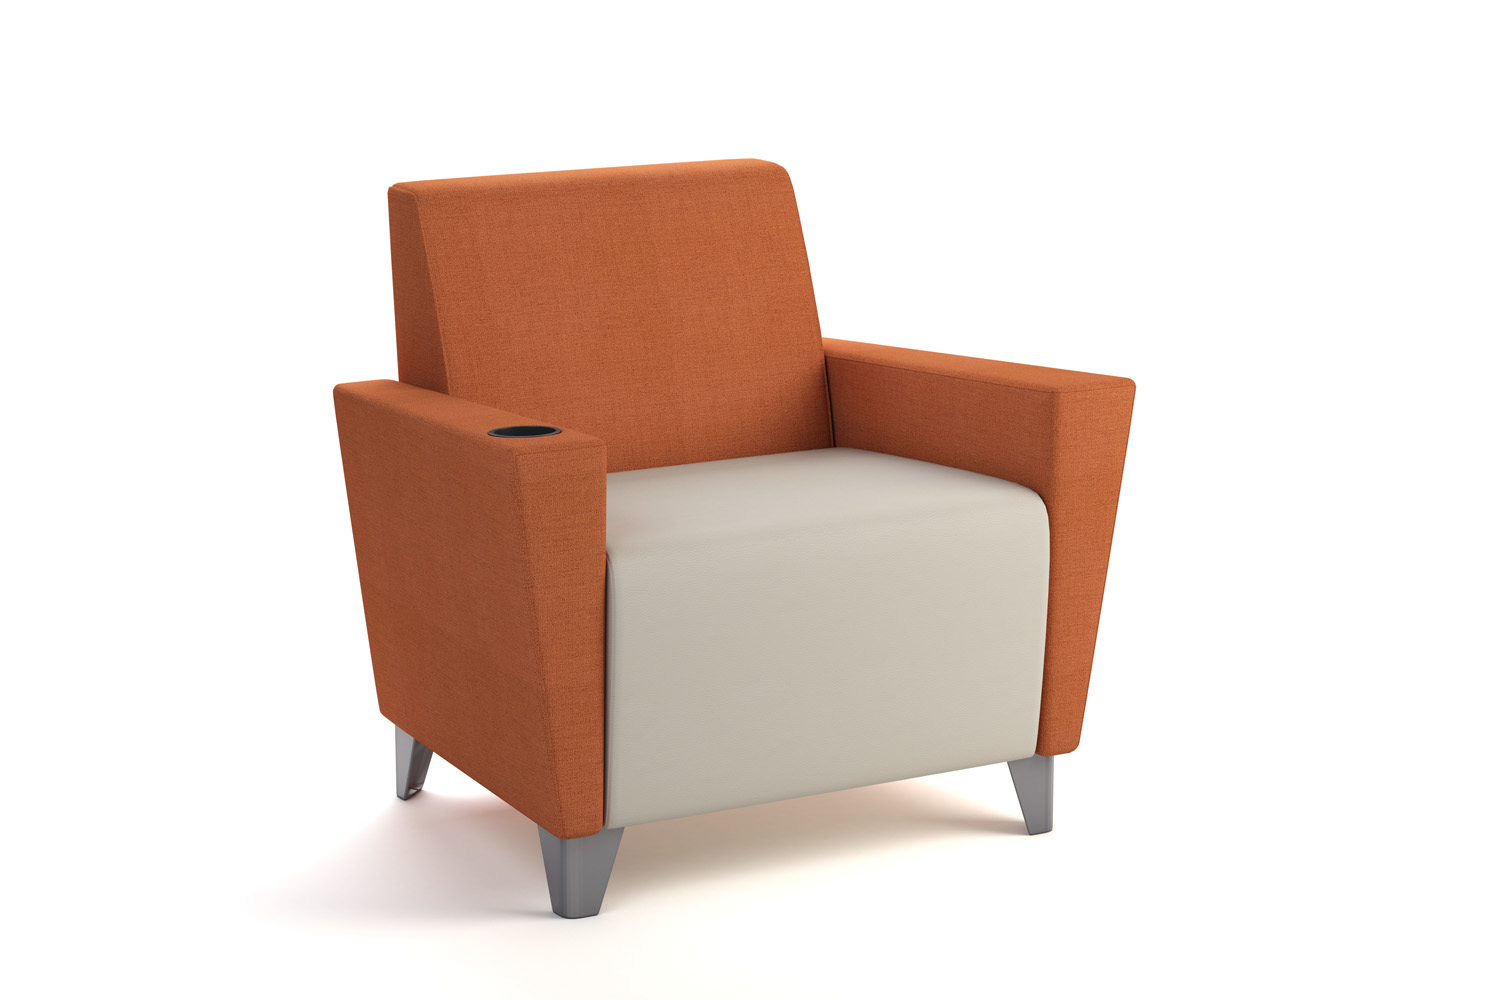 Flair single seat Lounge, Chrome Legs and two color option